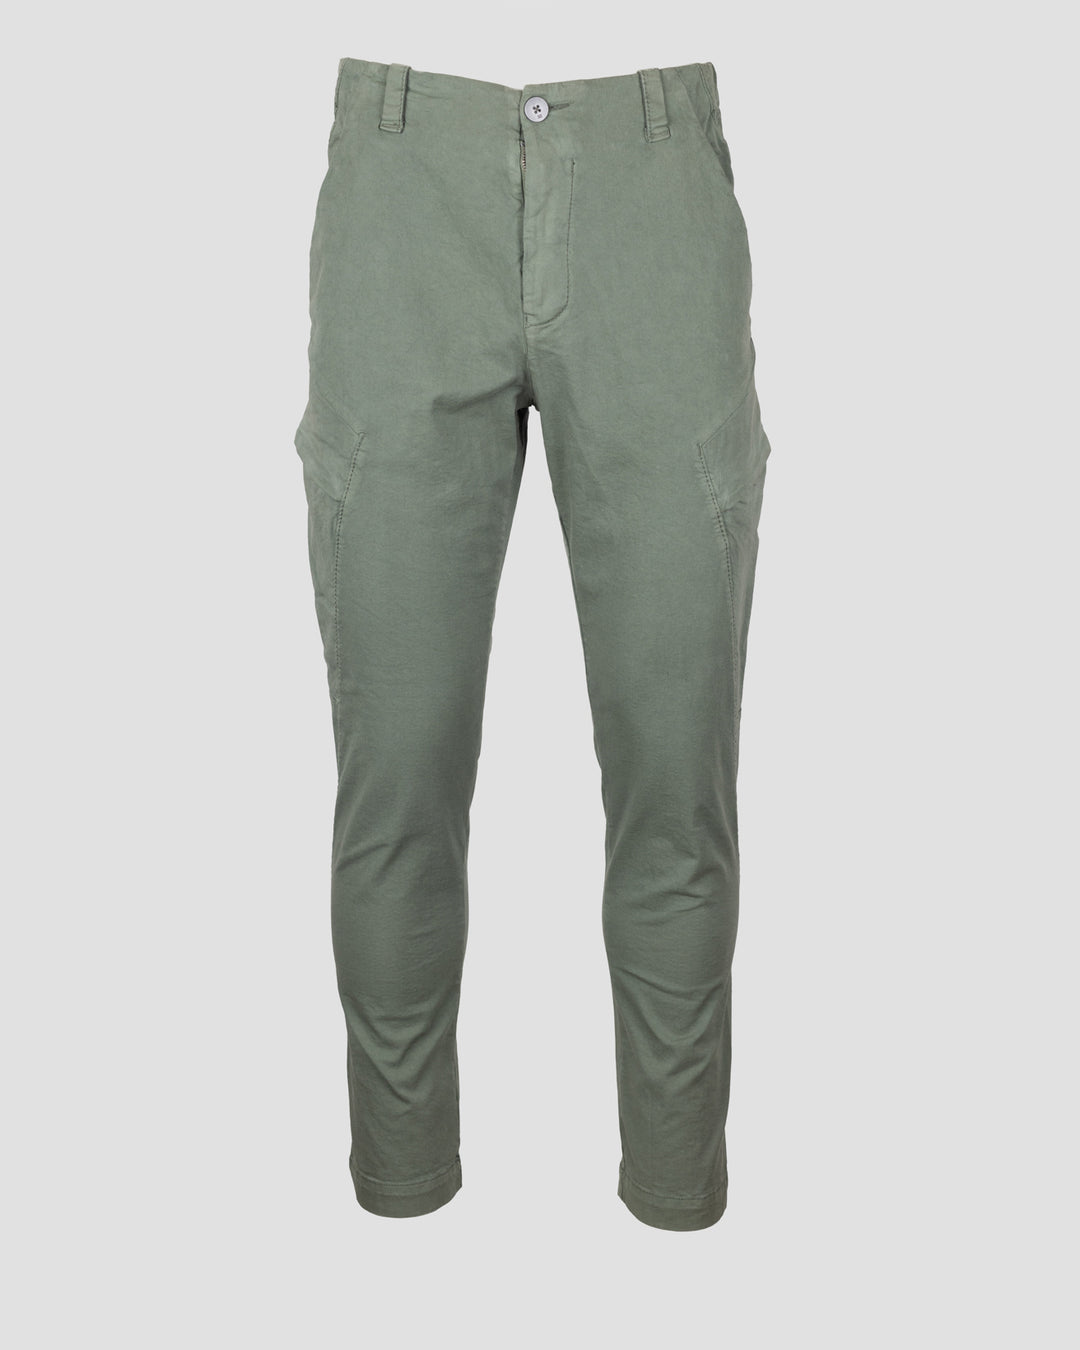 Tapered Silhouette Pants - SAGE